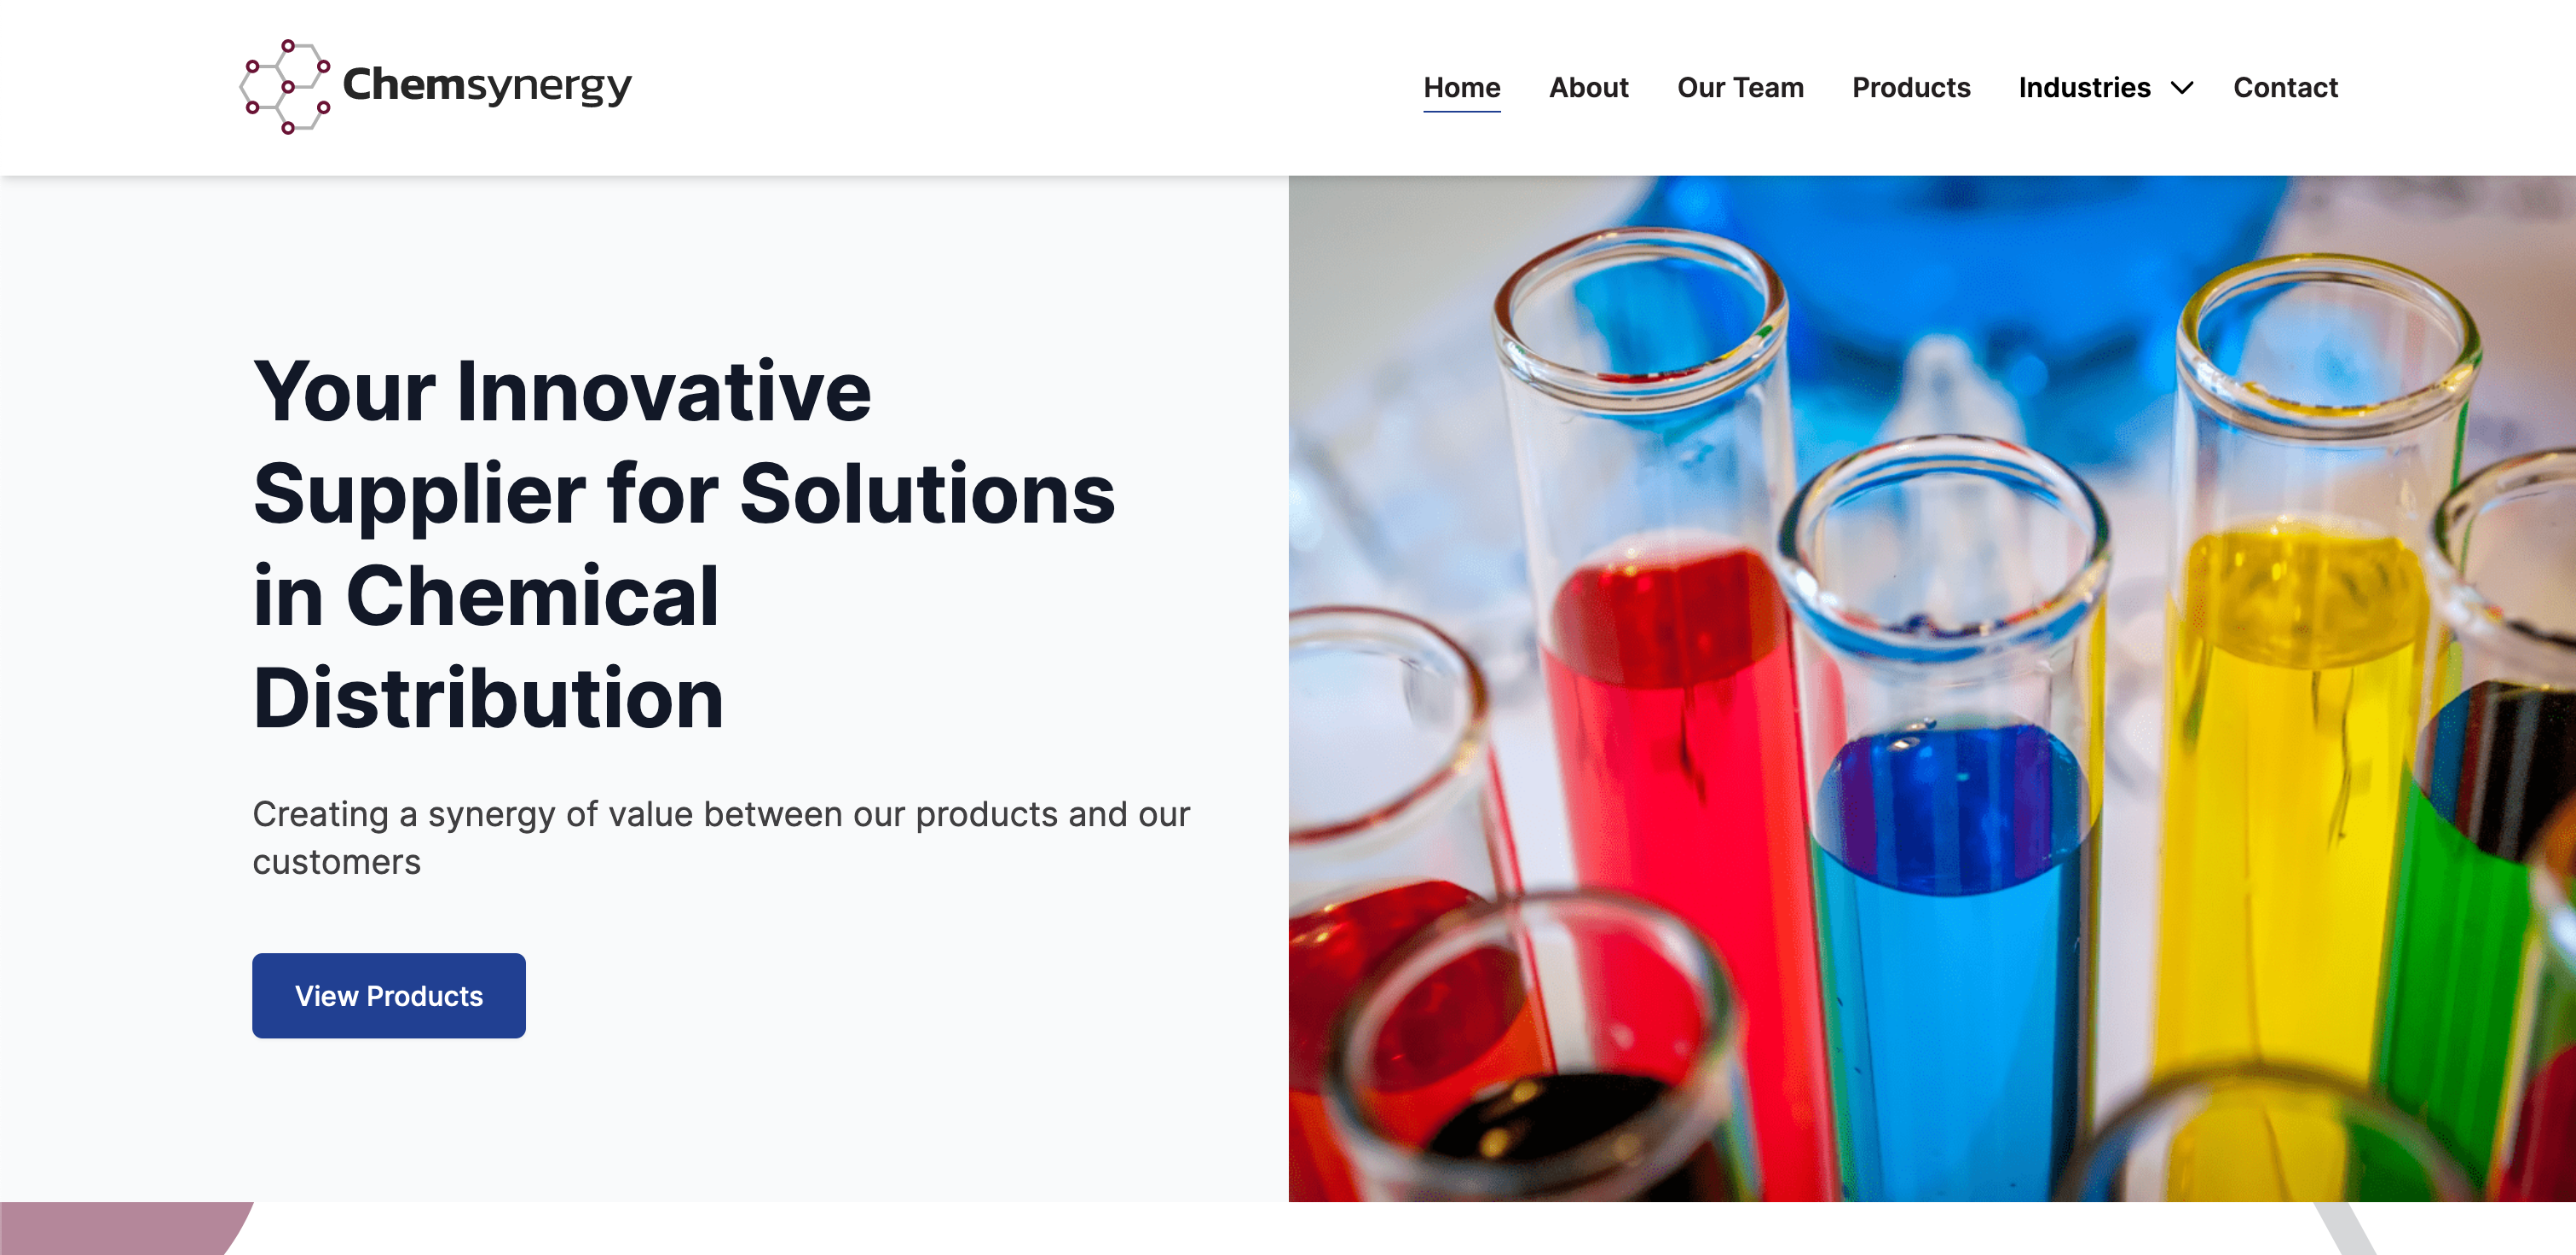 Landing page for chemsynergy with descriptive text and an image showing differently-coloured chemicals